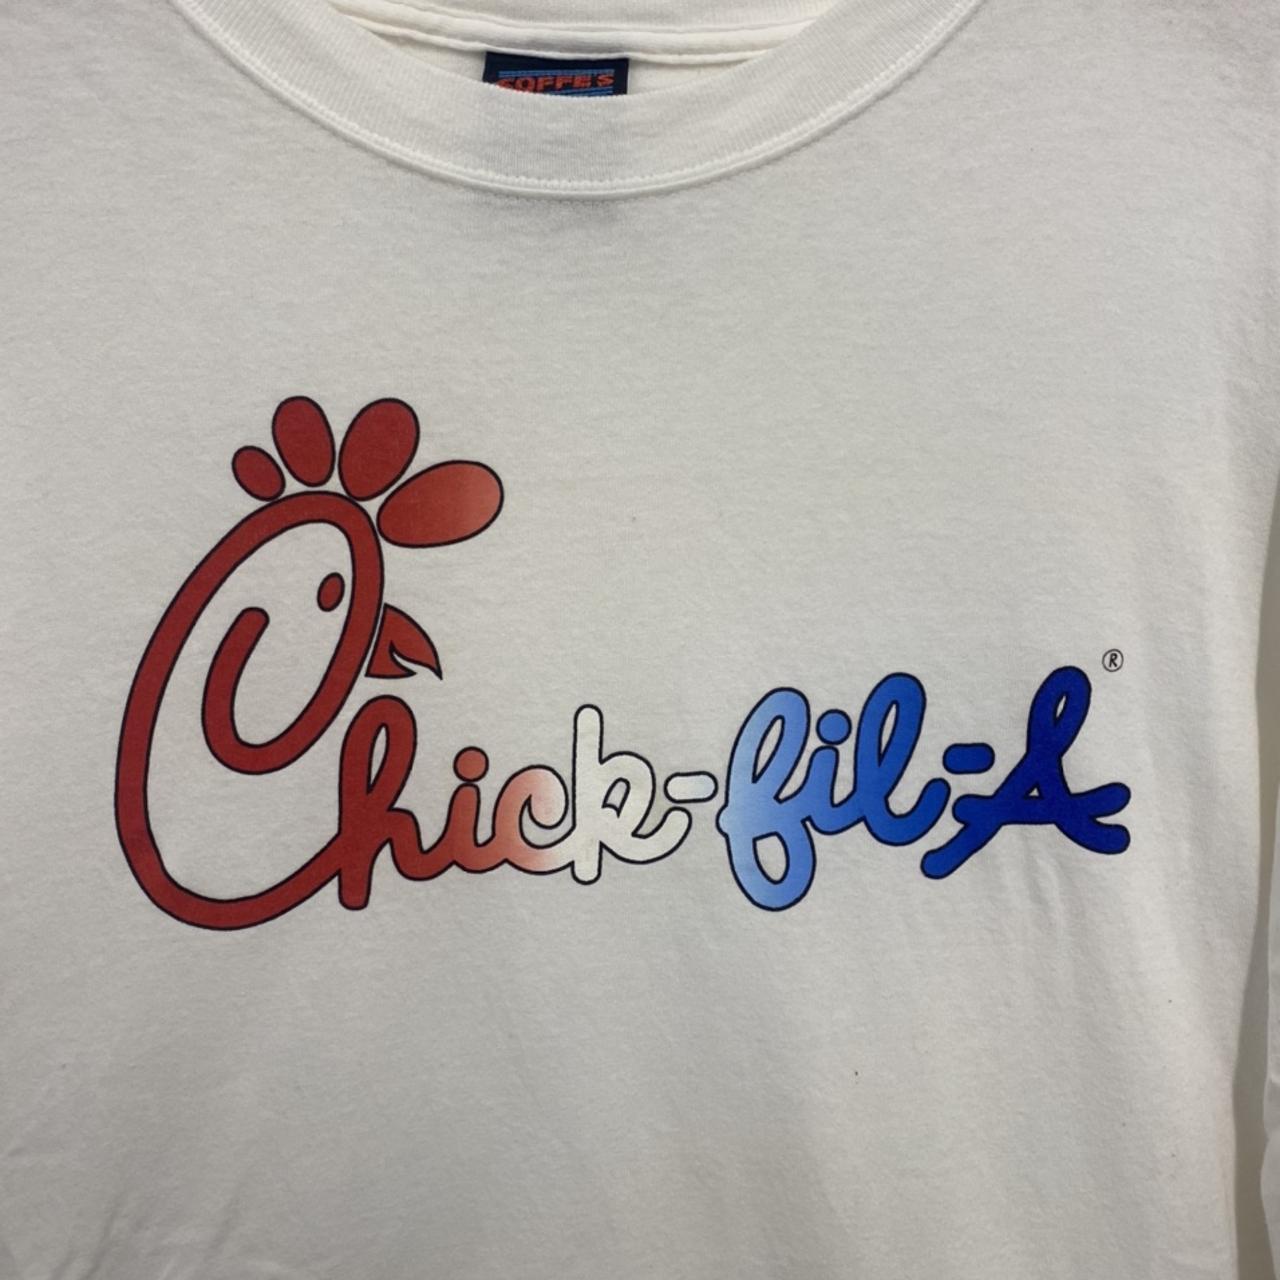 Vintage 90s Chick Fil A Spell Out Graphic Promo Fast... - Depop